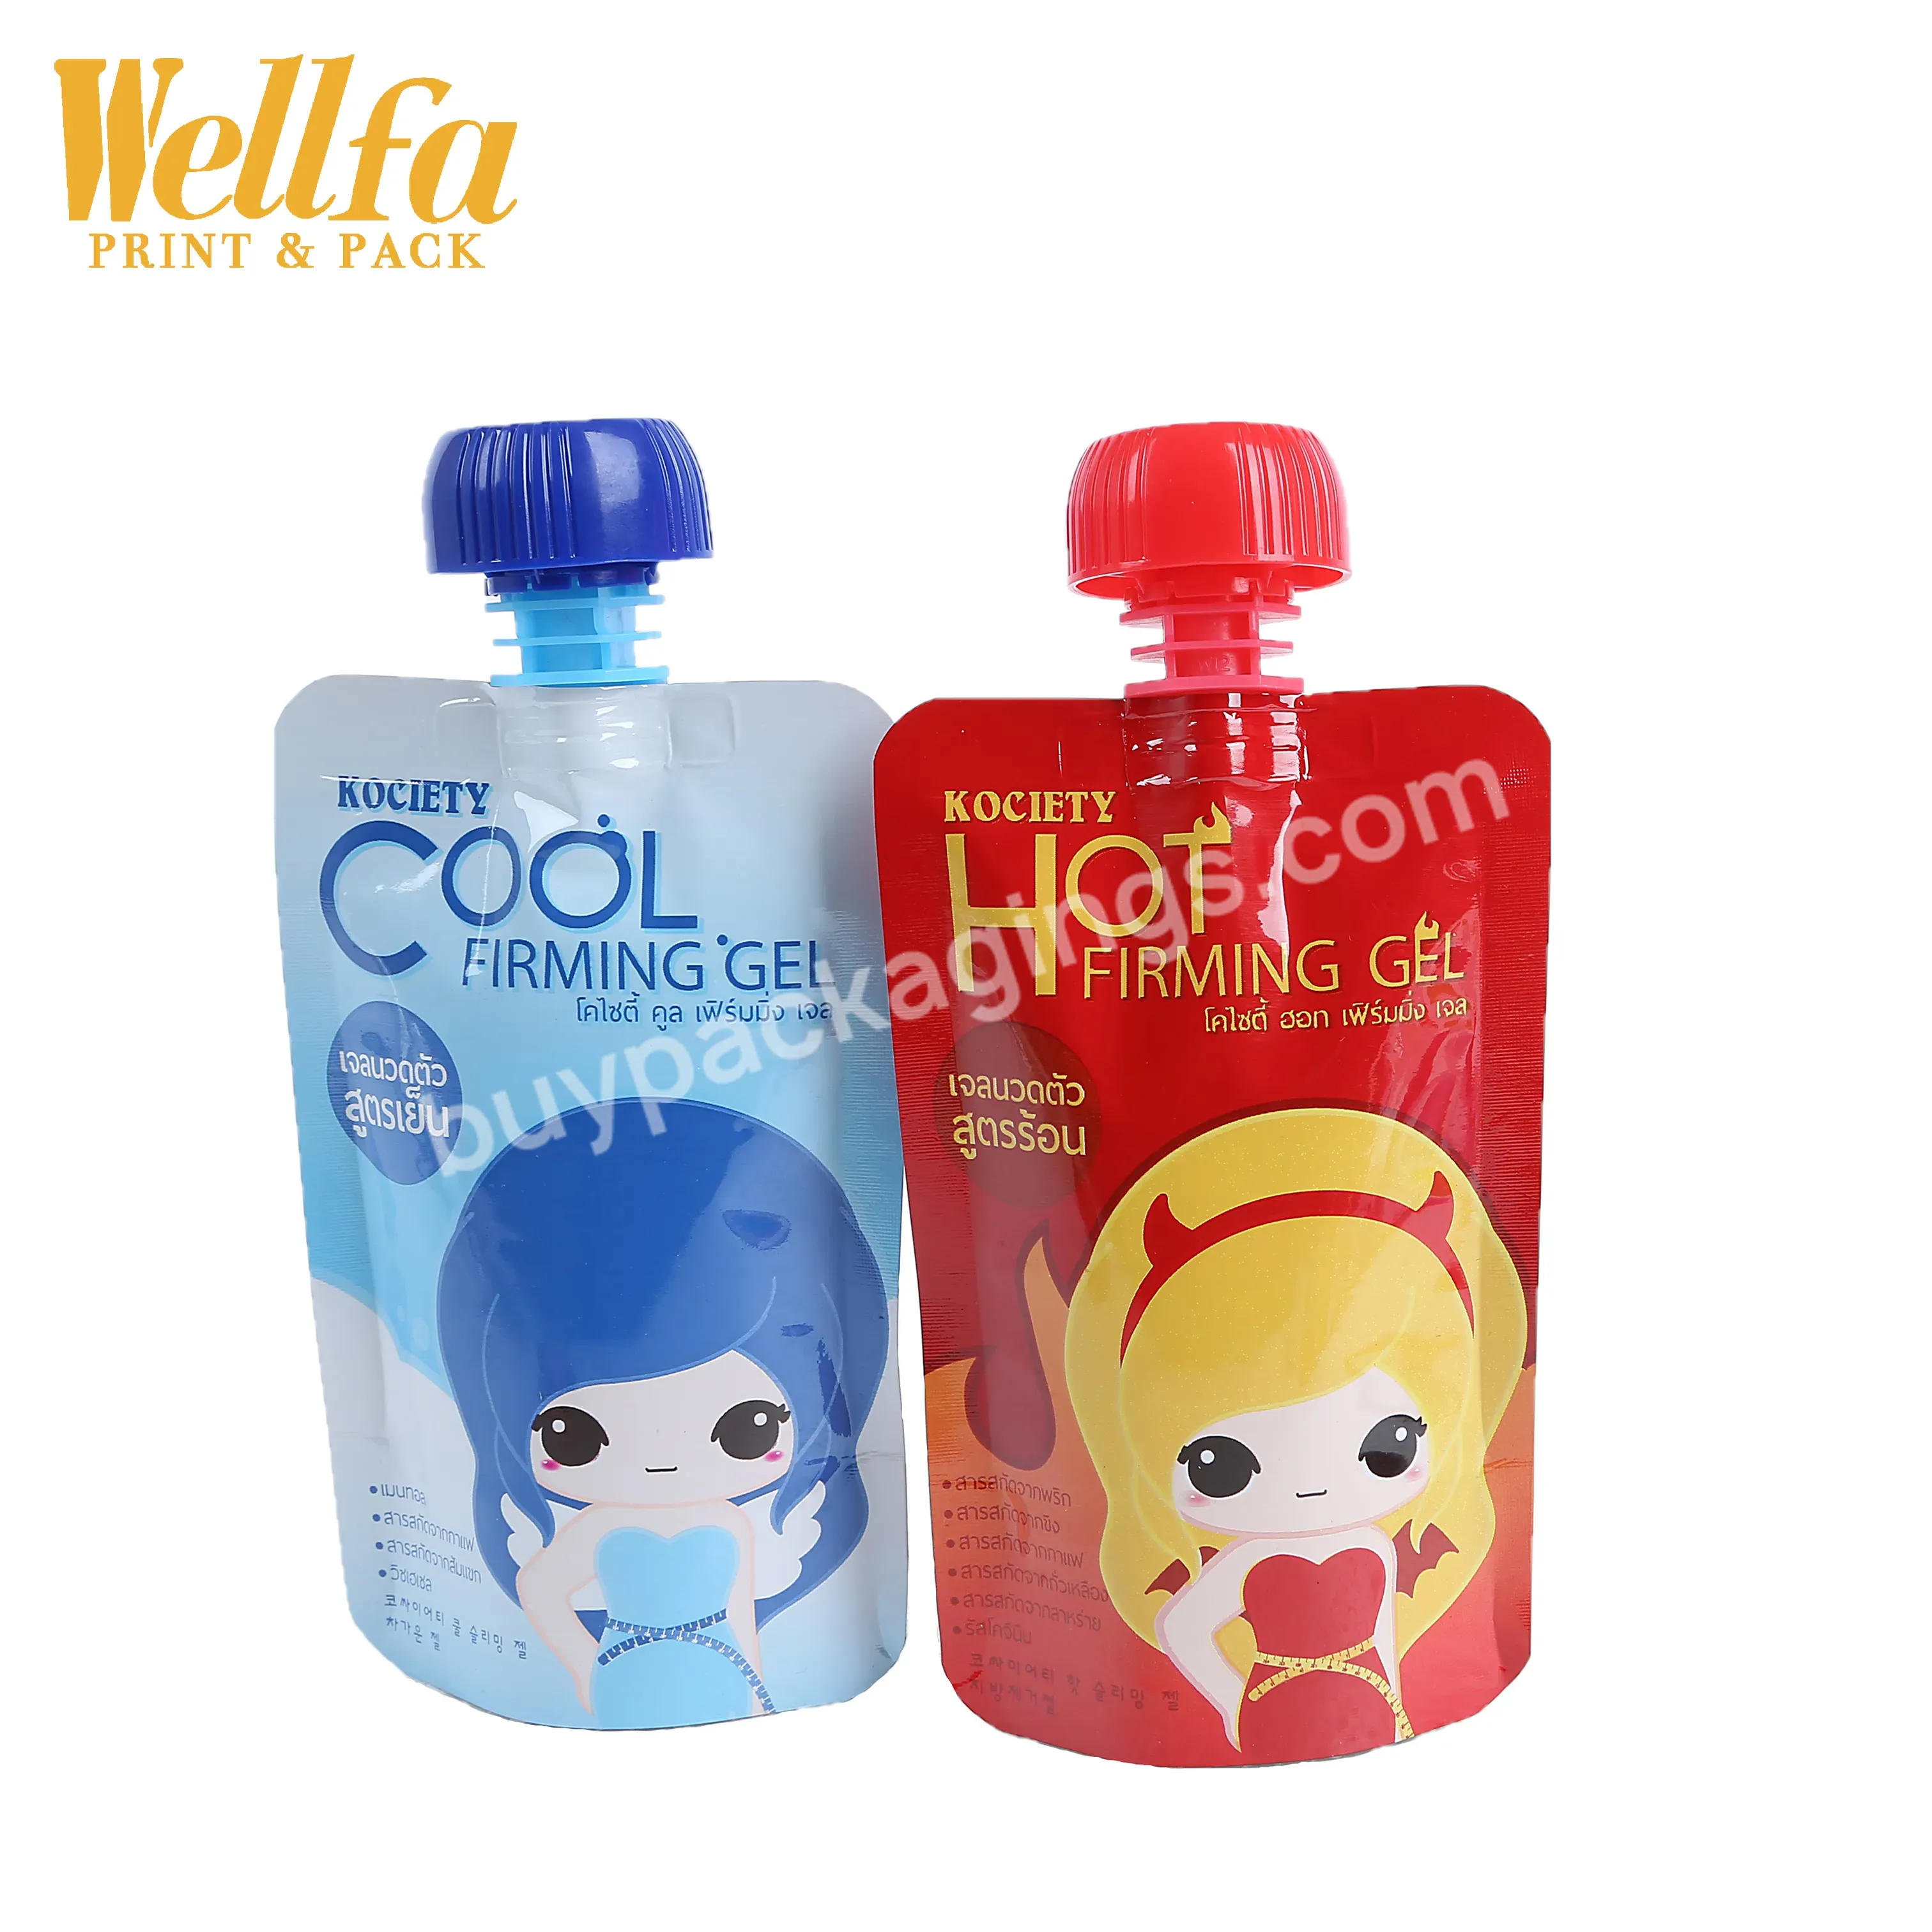 Oem Factory Custom Printed Film Pouch Plastic Packaging Stand Up Pouch With Spout For Jelly Or Puree